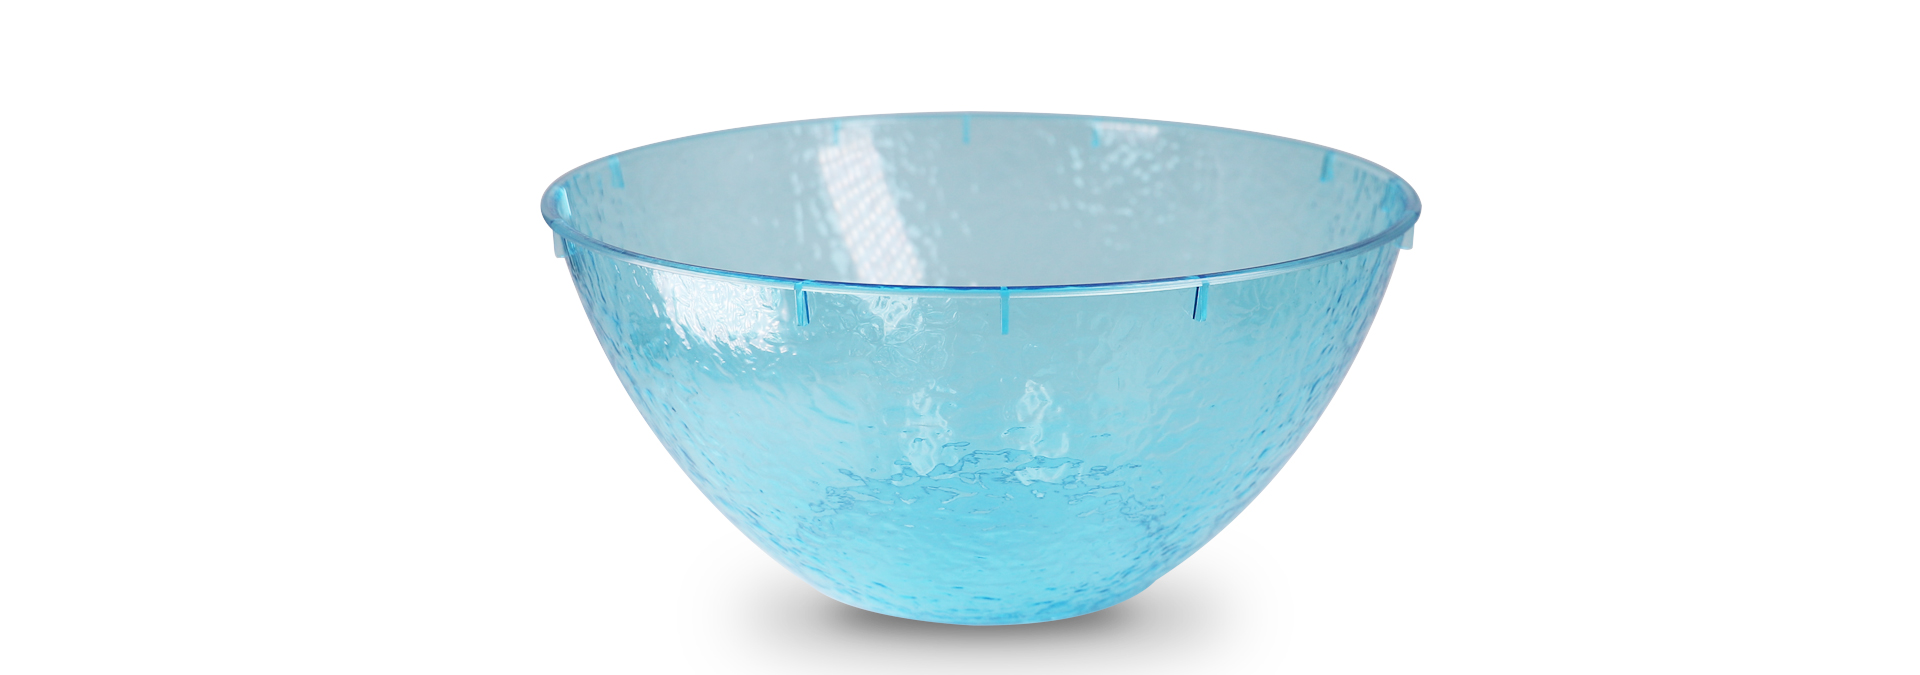 Water moire salad bowl